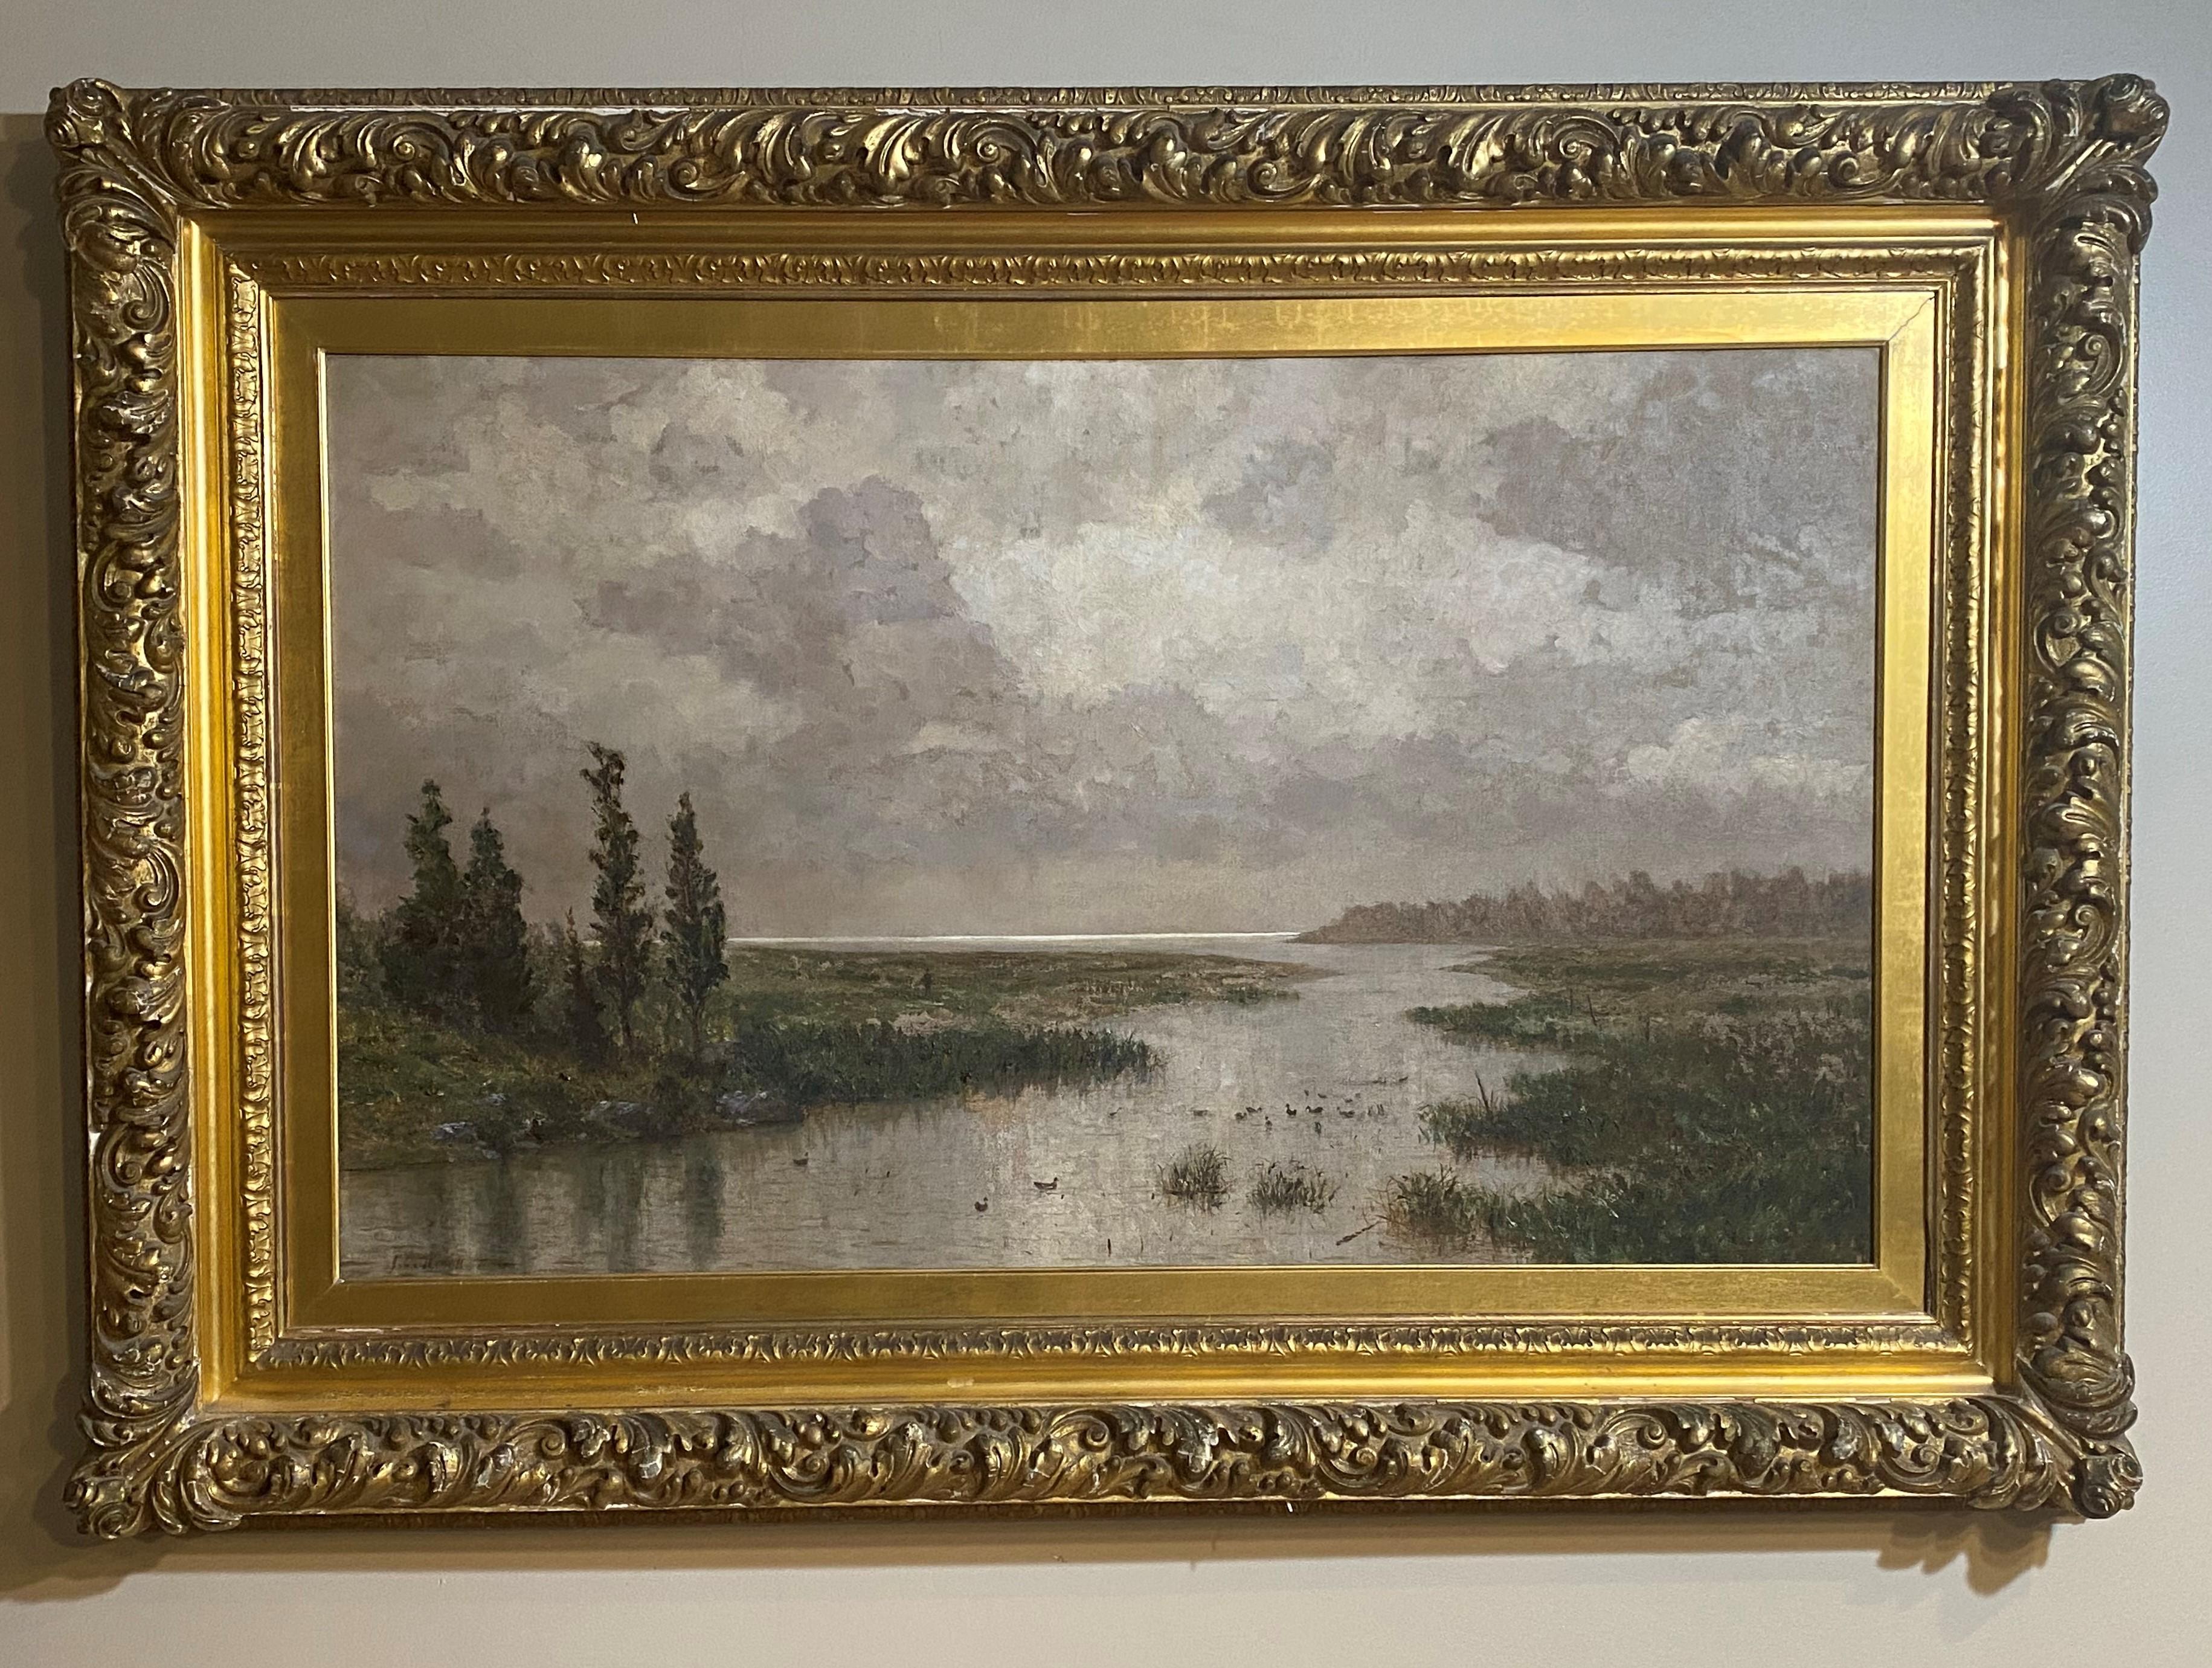 24" x 40" canvas size  In the original frame.  Important large scale landscape difficult to ship economically so let me know where you live. 

Born in NYC, James Craig Nicoll was an Eastern painter who was in San Diego in 1896-97.  While there, he